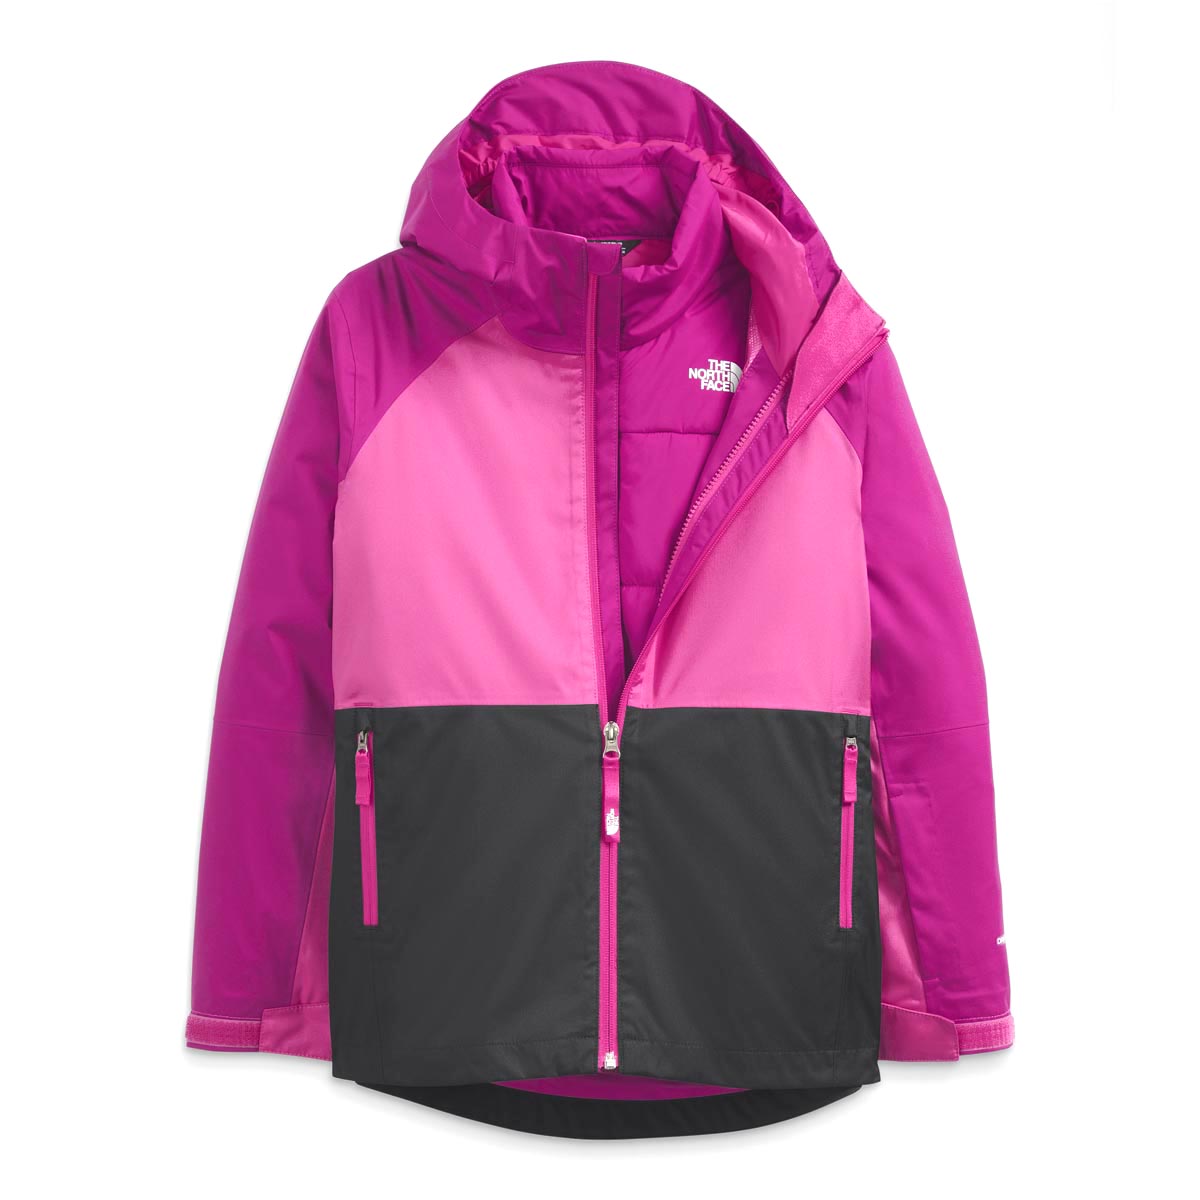 The North Face Girls' Freedom Triclimate